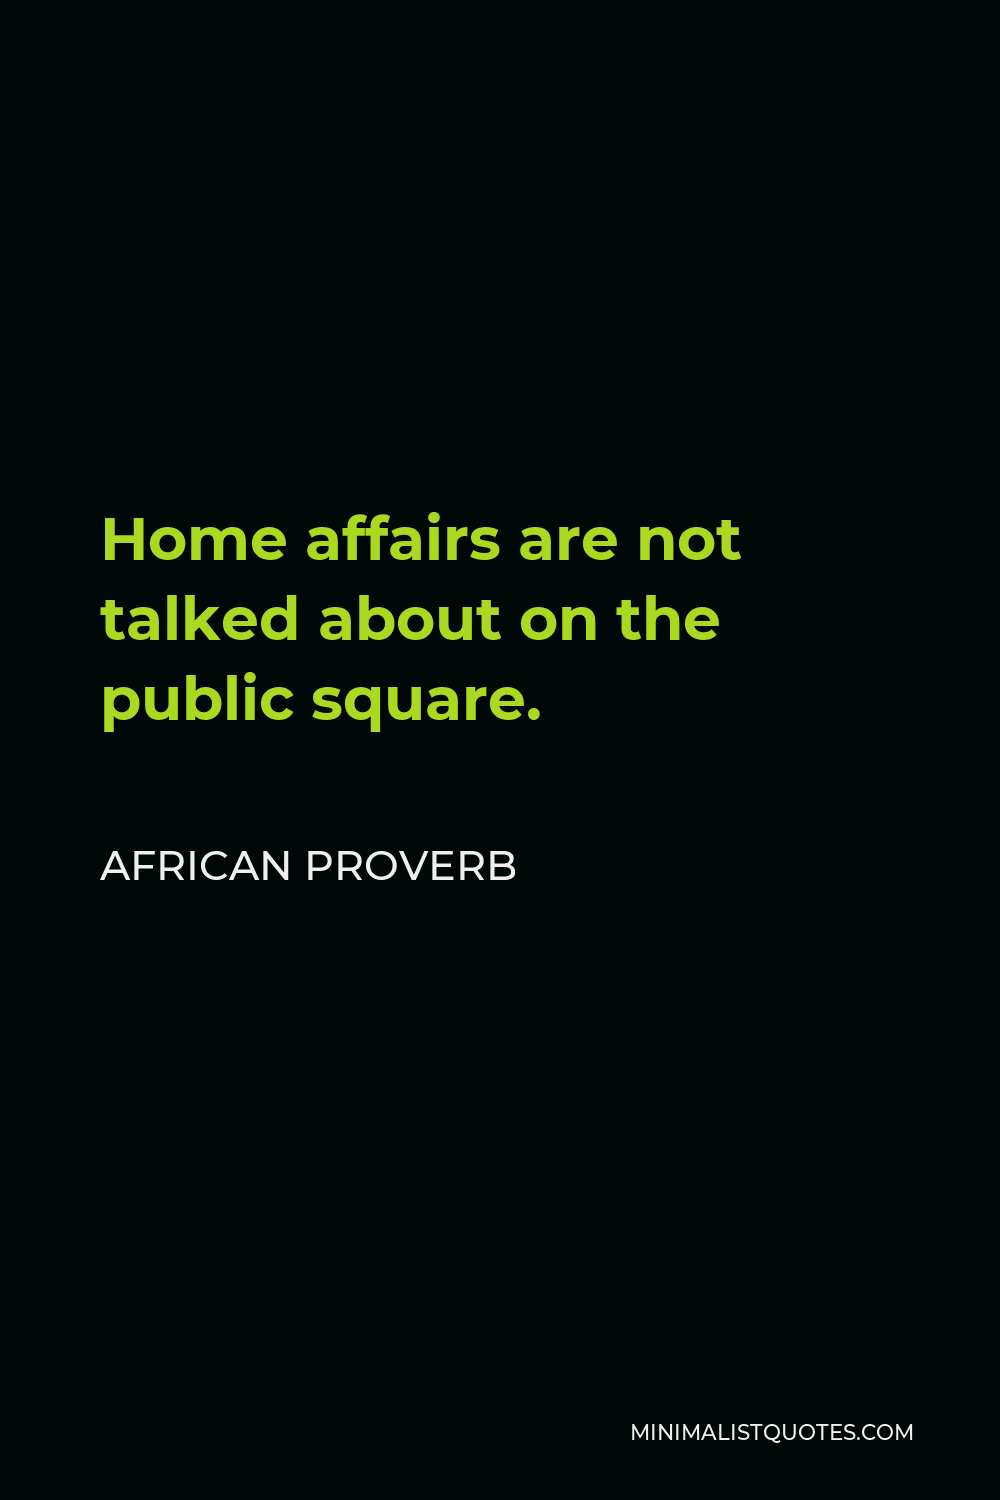 African Proverb Quote - Home affairs are not talked about on the public square.